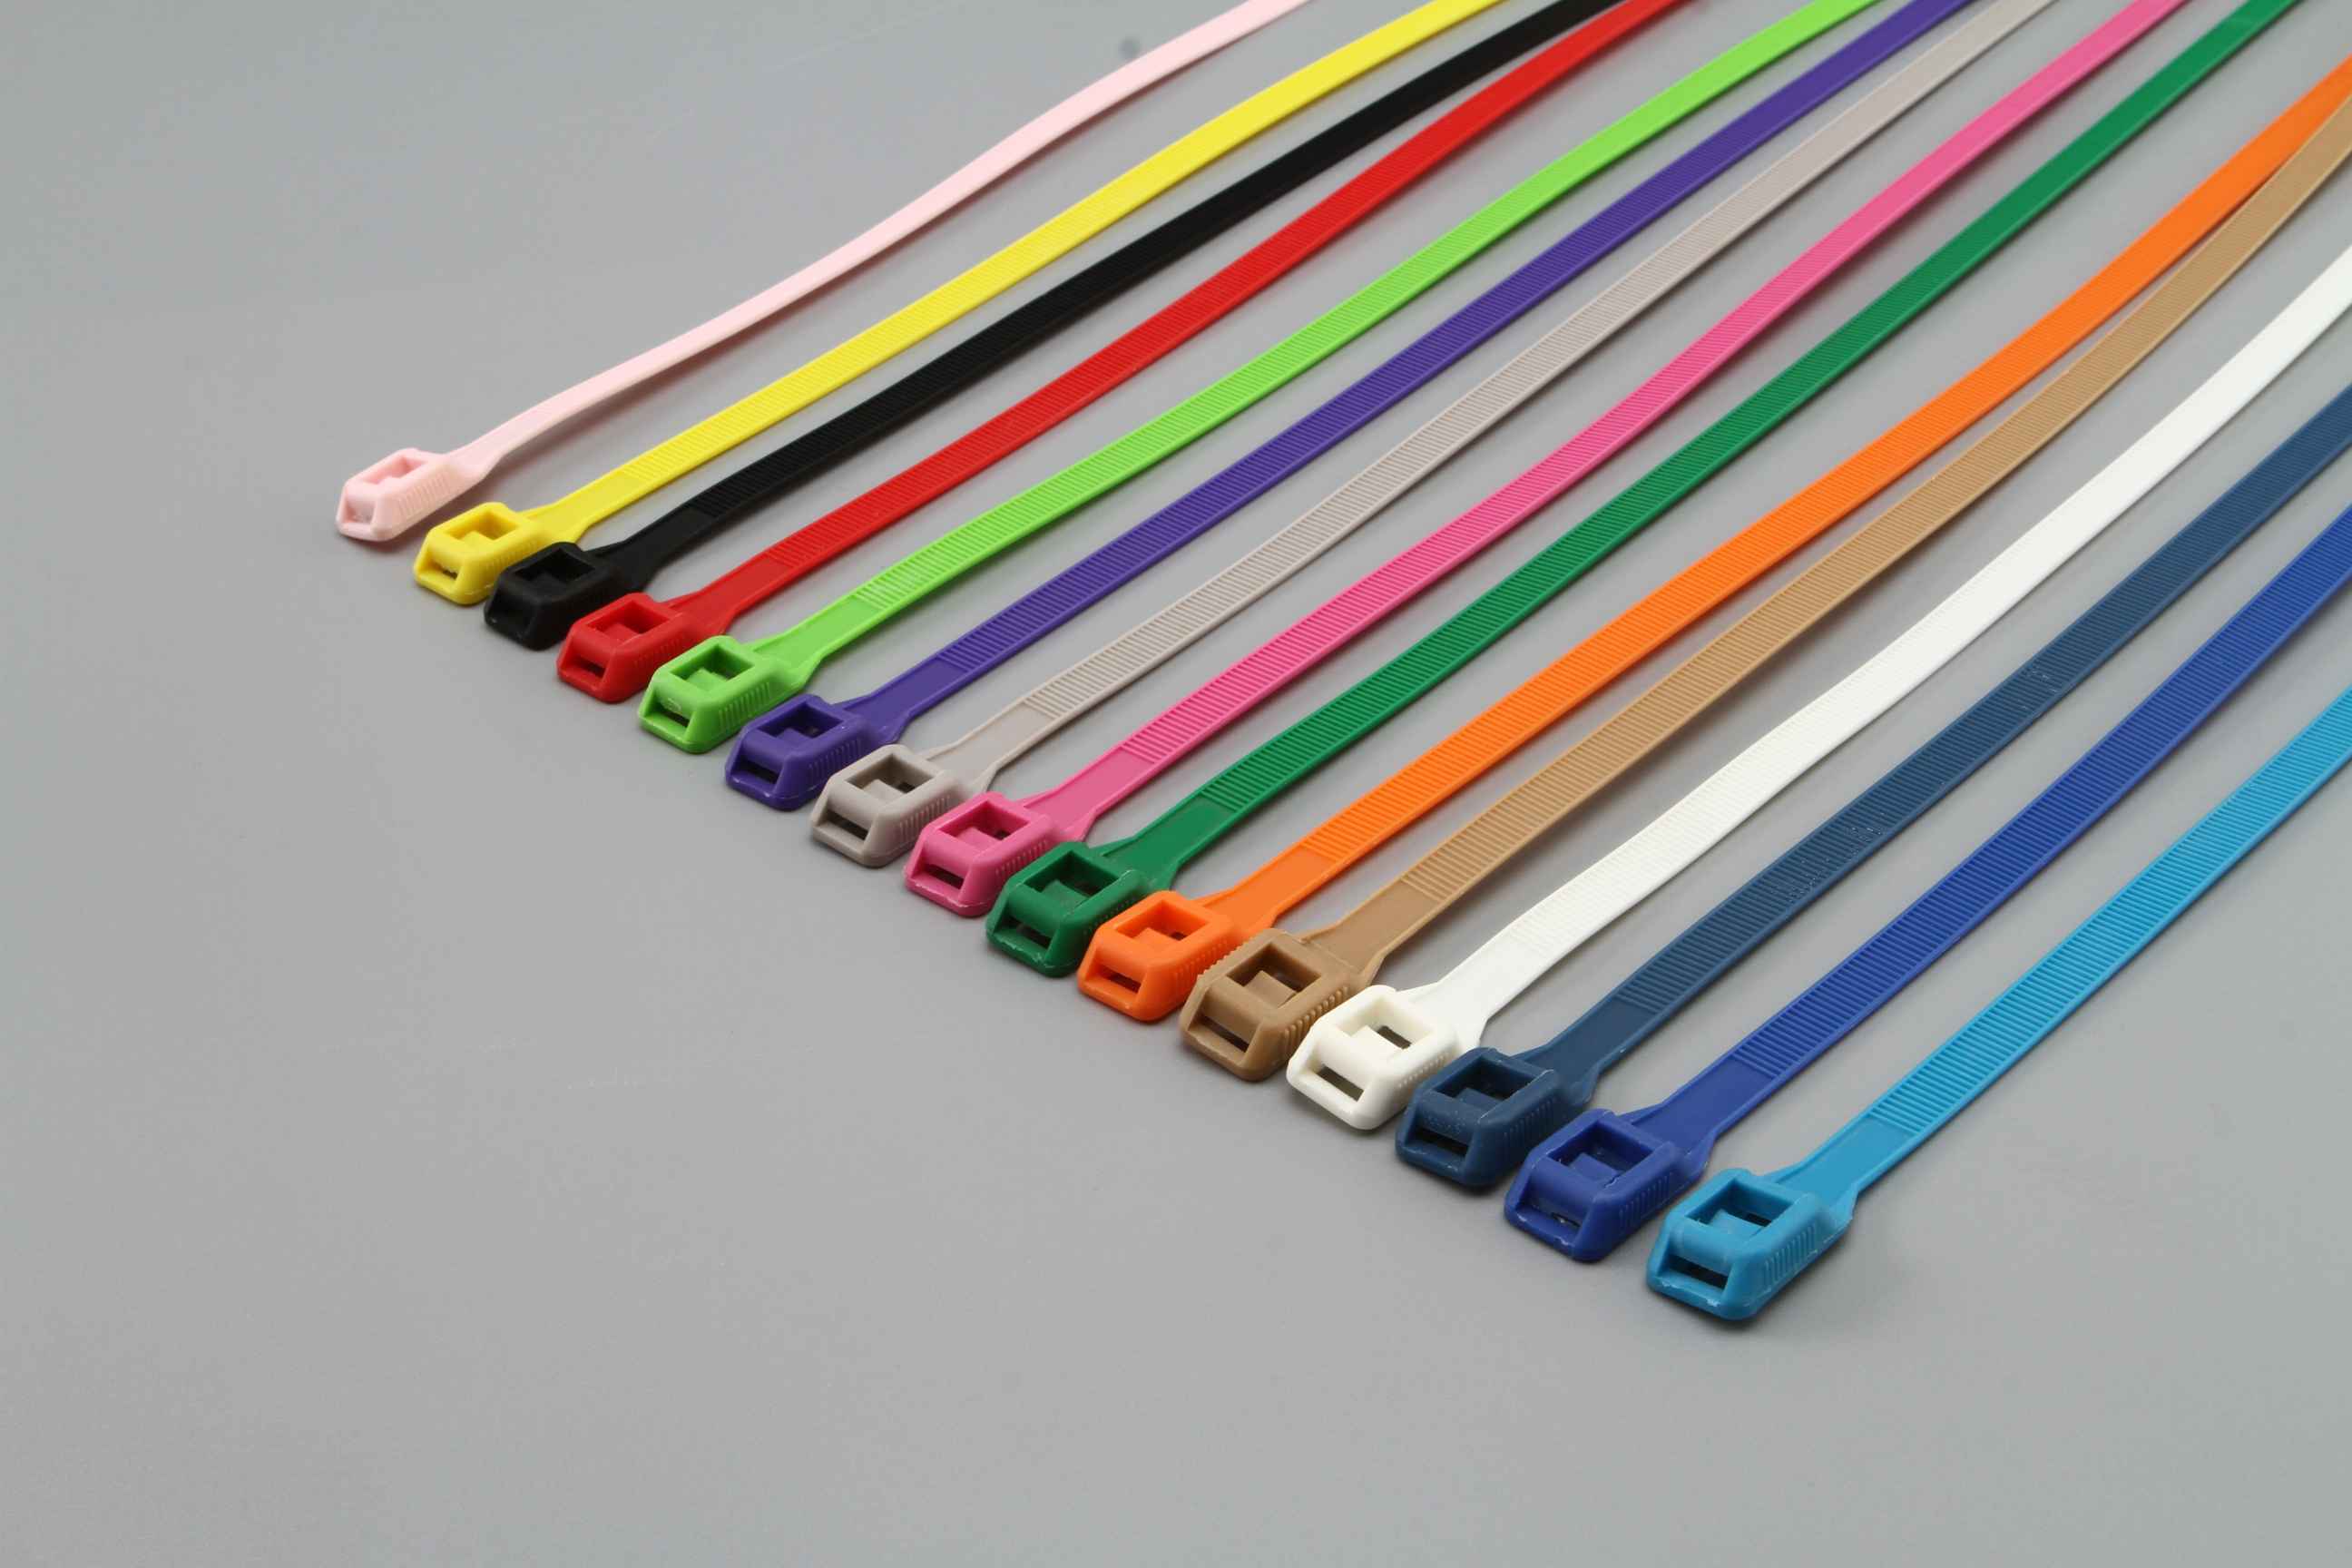 Anti disassembly nylon cable ties - 1 